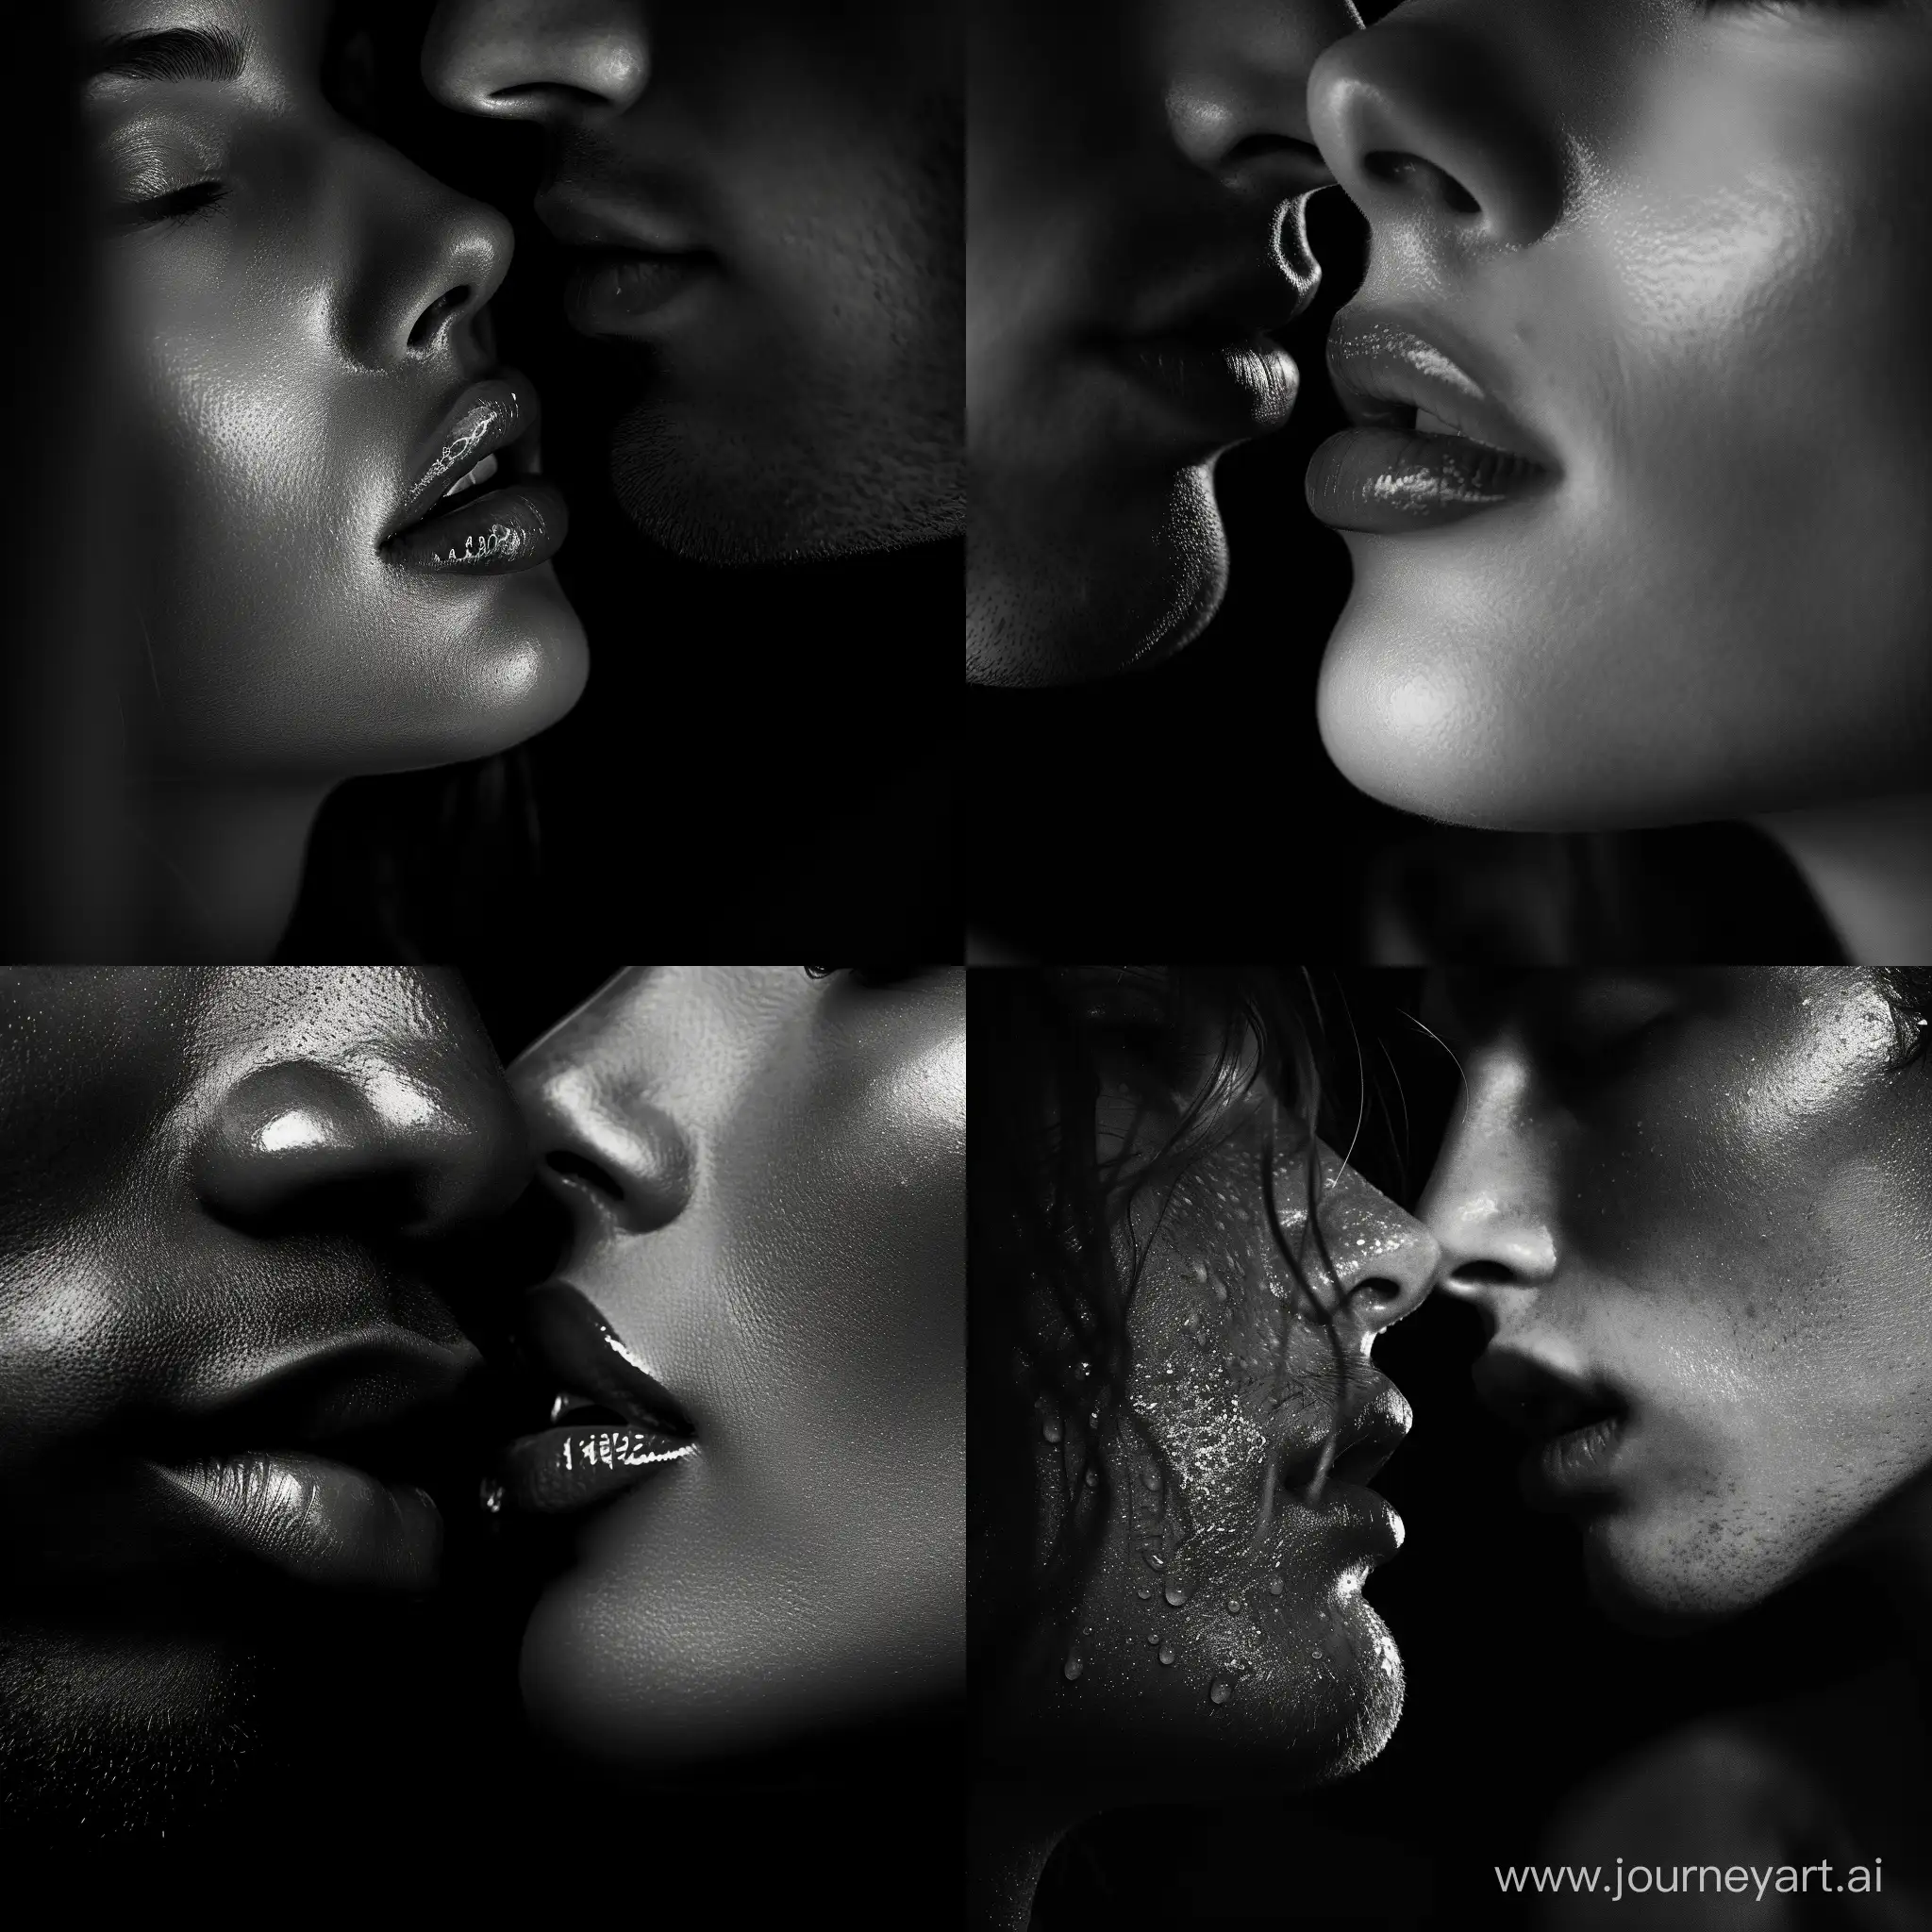 lips close-up, man and woman, sensual black and white photo, black background